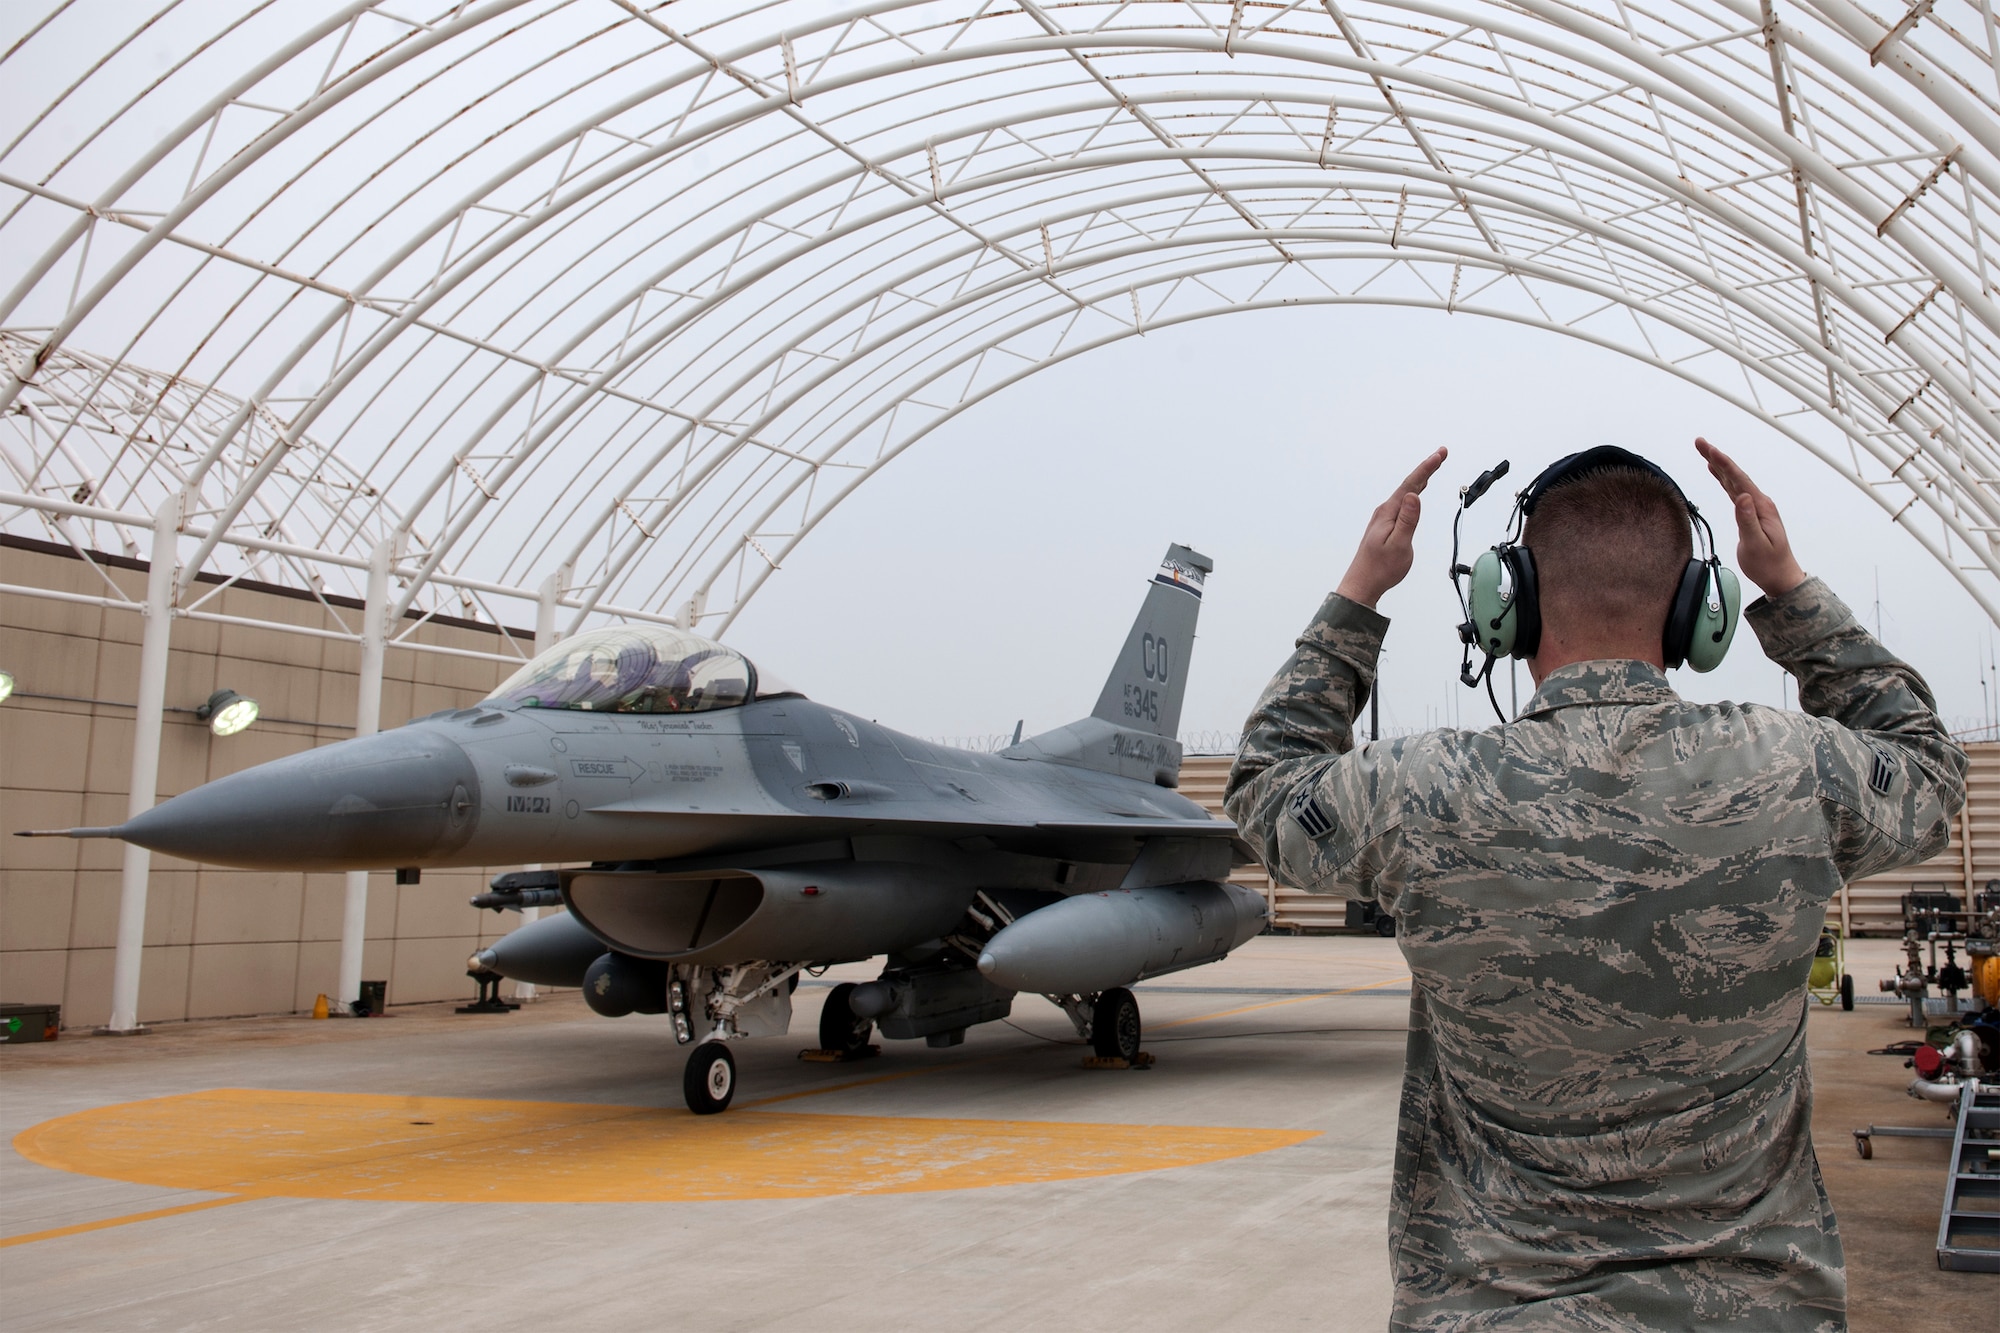 Senior Airman Mitchell Jamison, 120th Expeditionary Aircraft Maintenance Unit crew chief, marshals his father, Lt. Col. James Reeman, 120th Expeditionary Fighter Squadron F-16 Fighting Falcon pilot, April 16, 2015, at Kunsan Air Base, Republic of Korea. Following in the steps of Reeman’s father, who served 18 months in the ROK as an enlisted Marine in the 1950’s, this is both Reeman and Jamison’s first time being not only deployed together, but in the ROK. (U.S. Air Force photo by Senior Airman Katrina Heikkinen/Released)